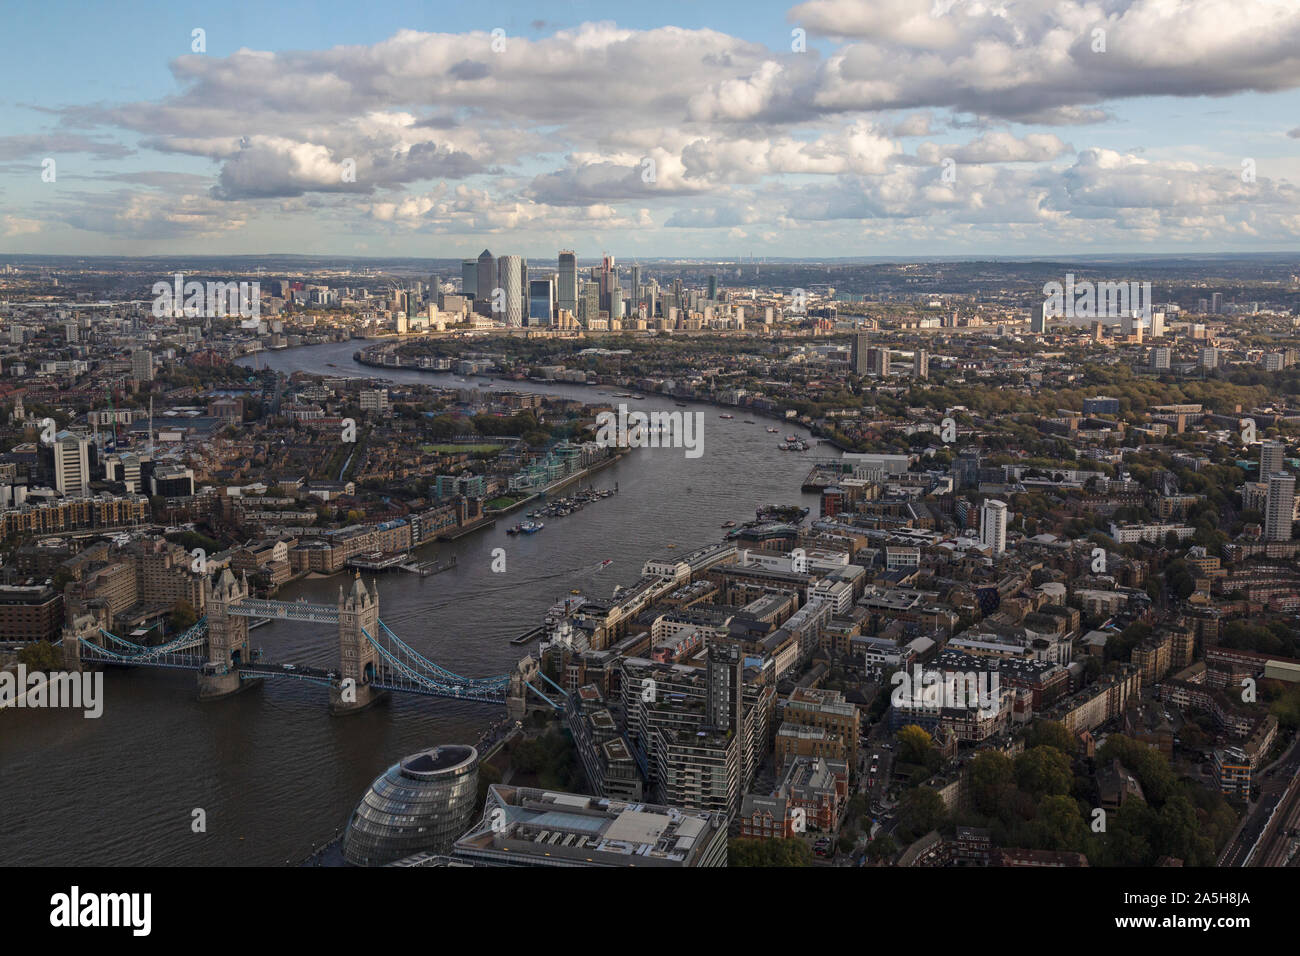 An aerial view looking East up the River Thames in London, from Tower Bridge up to Canary Wharf. Stock Photo